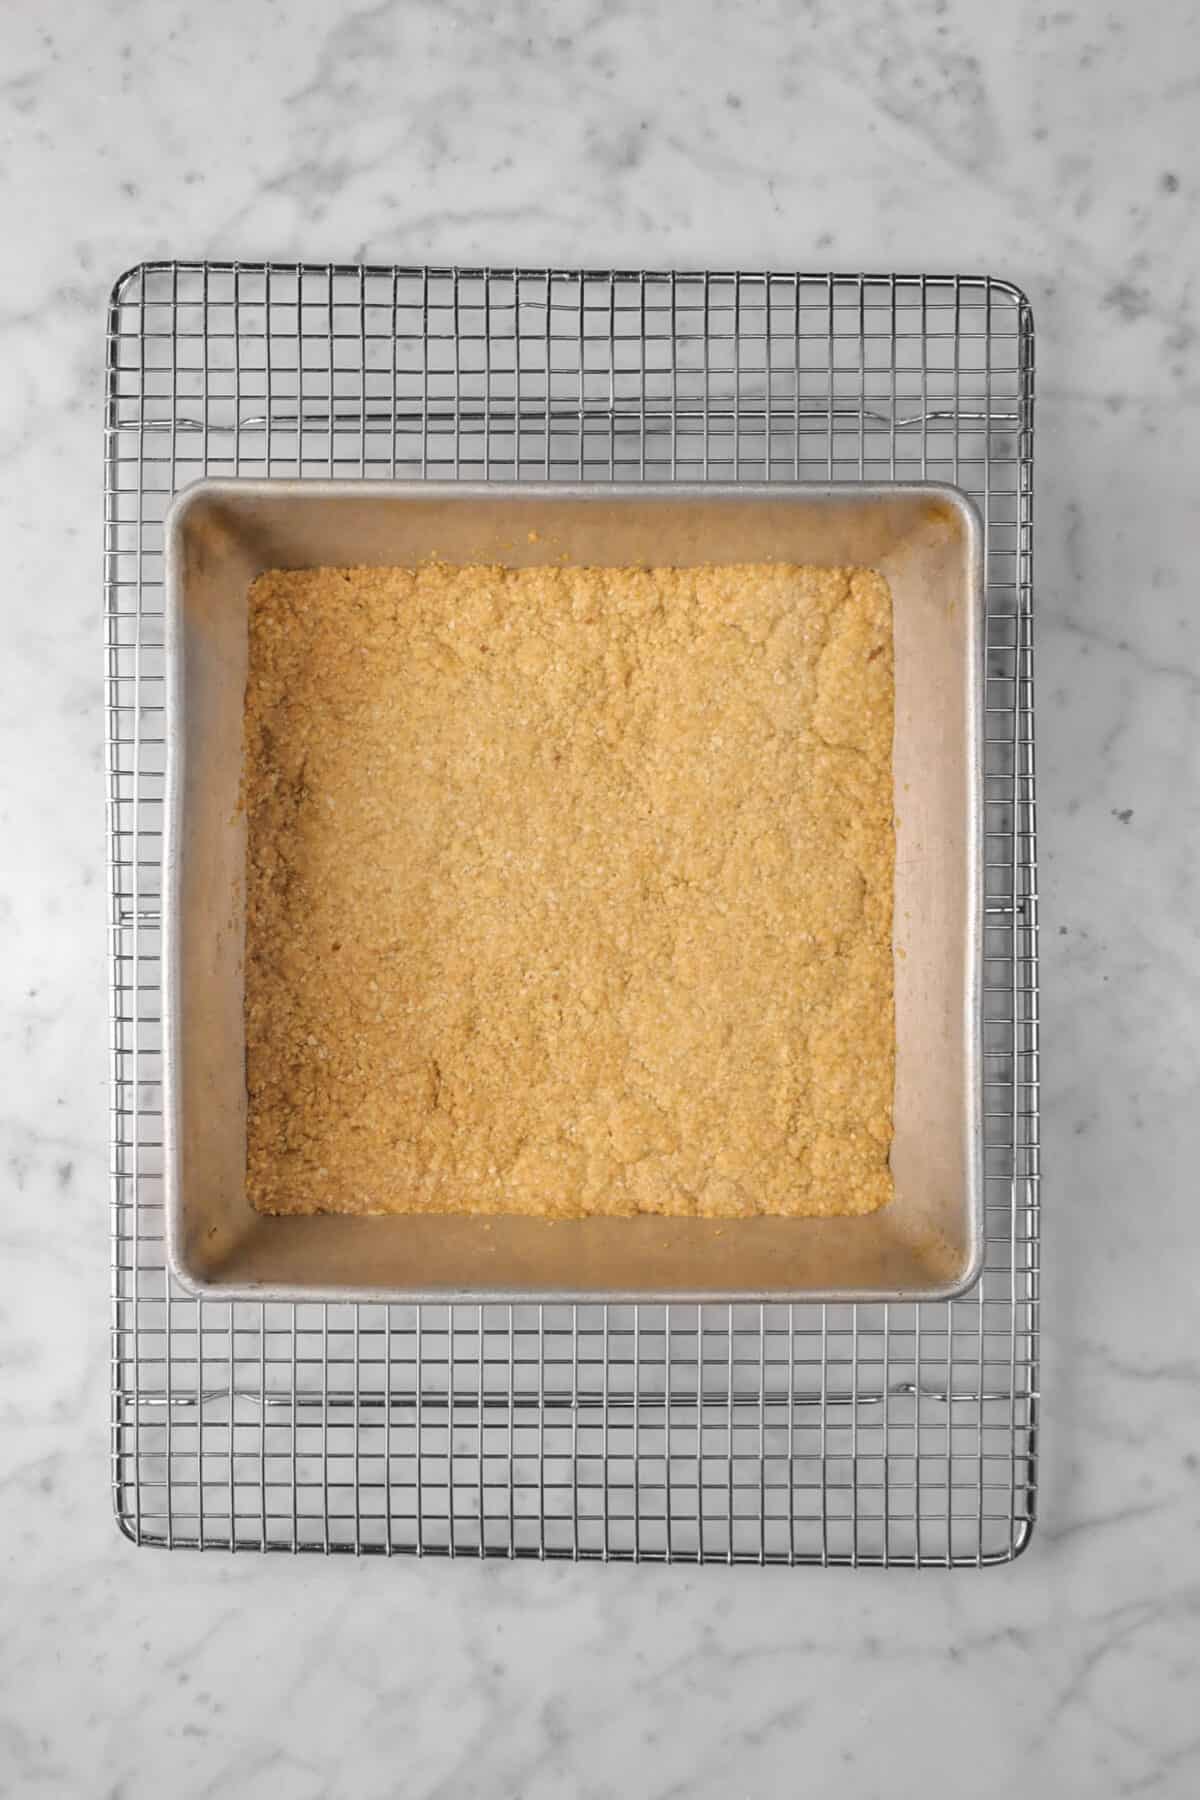 crumble mixture baked in a square pan